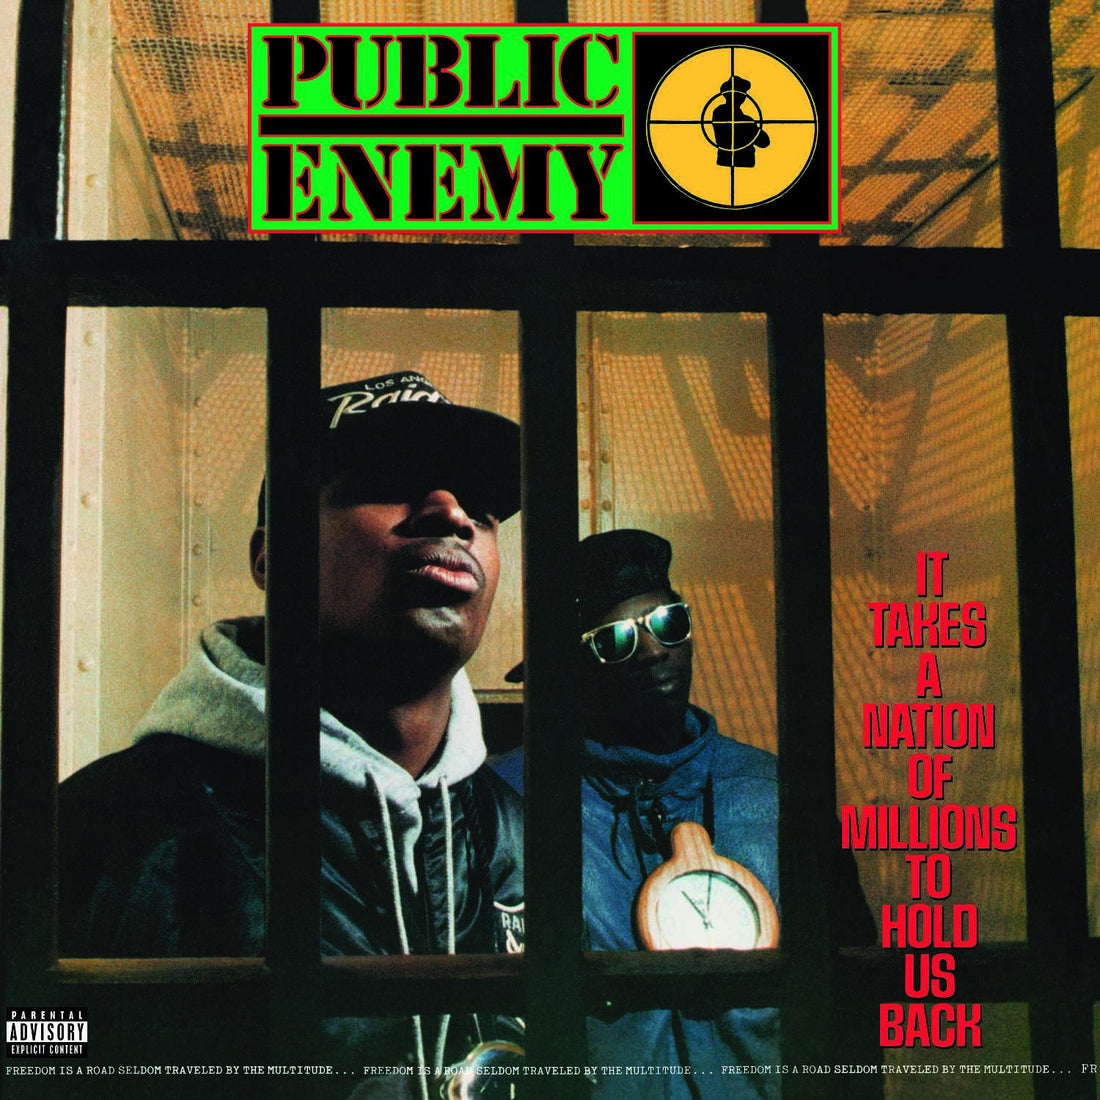 Public Enemy - "It Takes A Nation Of Millions To Hold Us Back" LP Vinyl